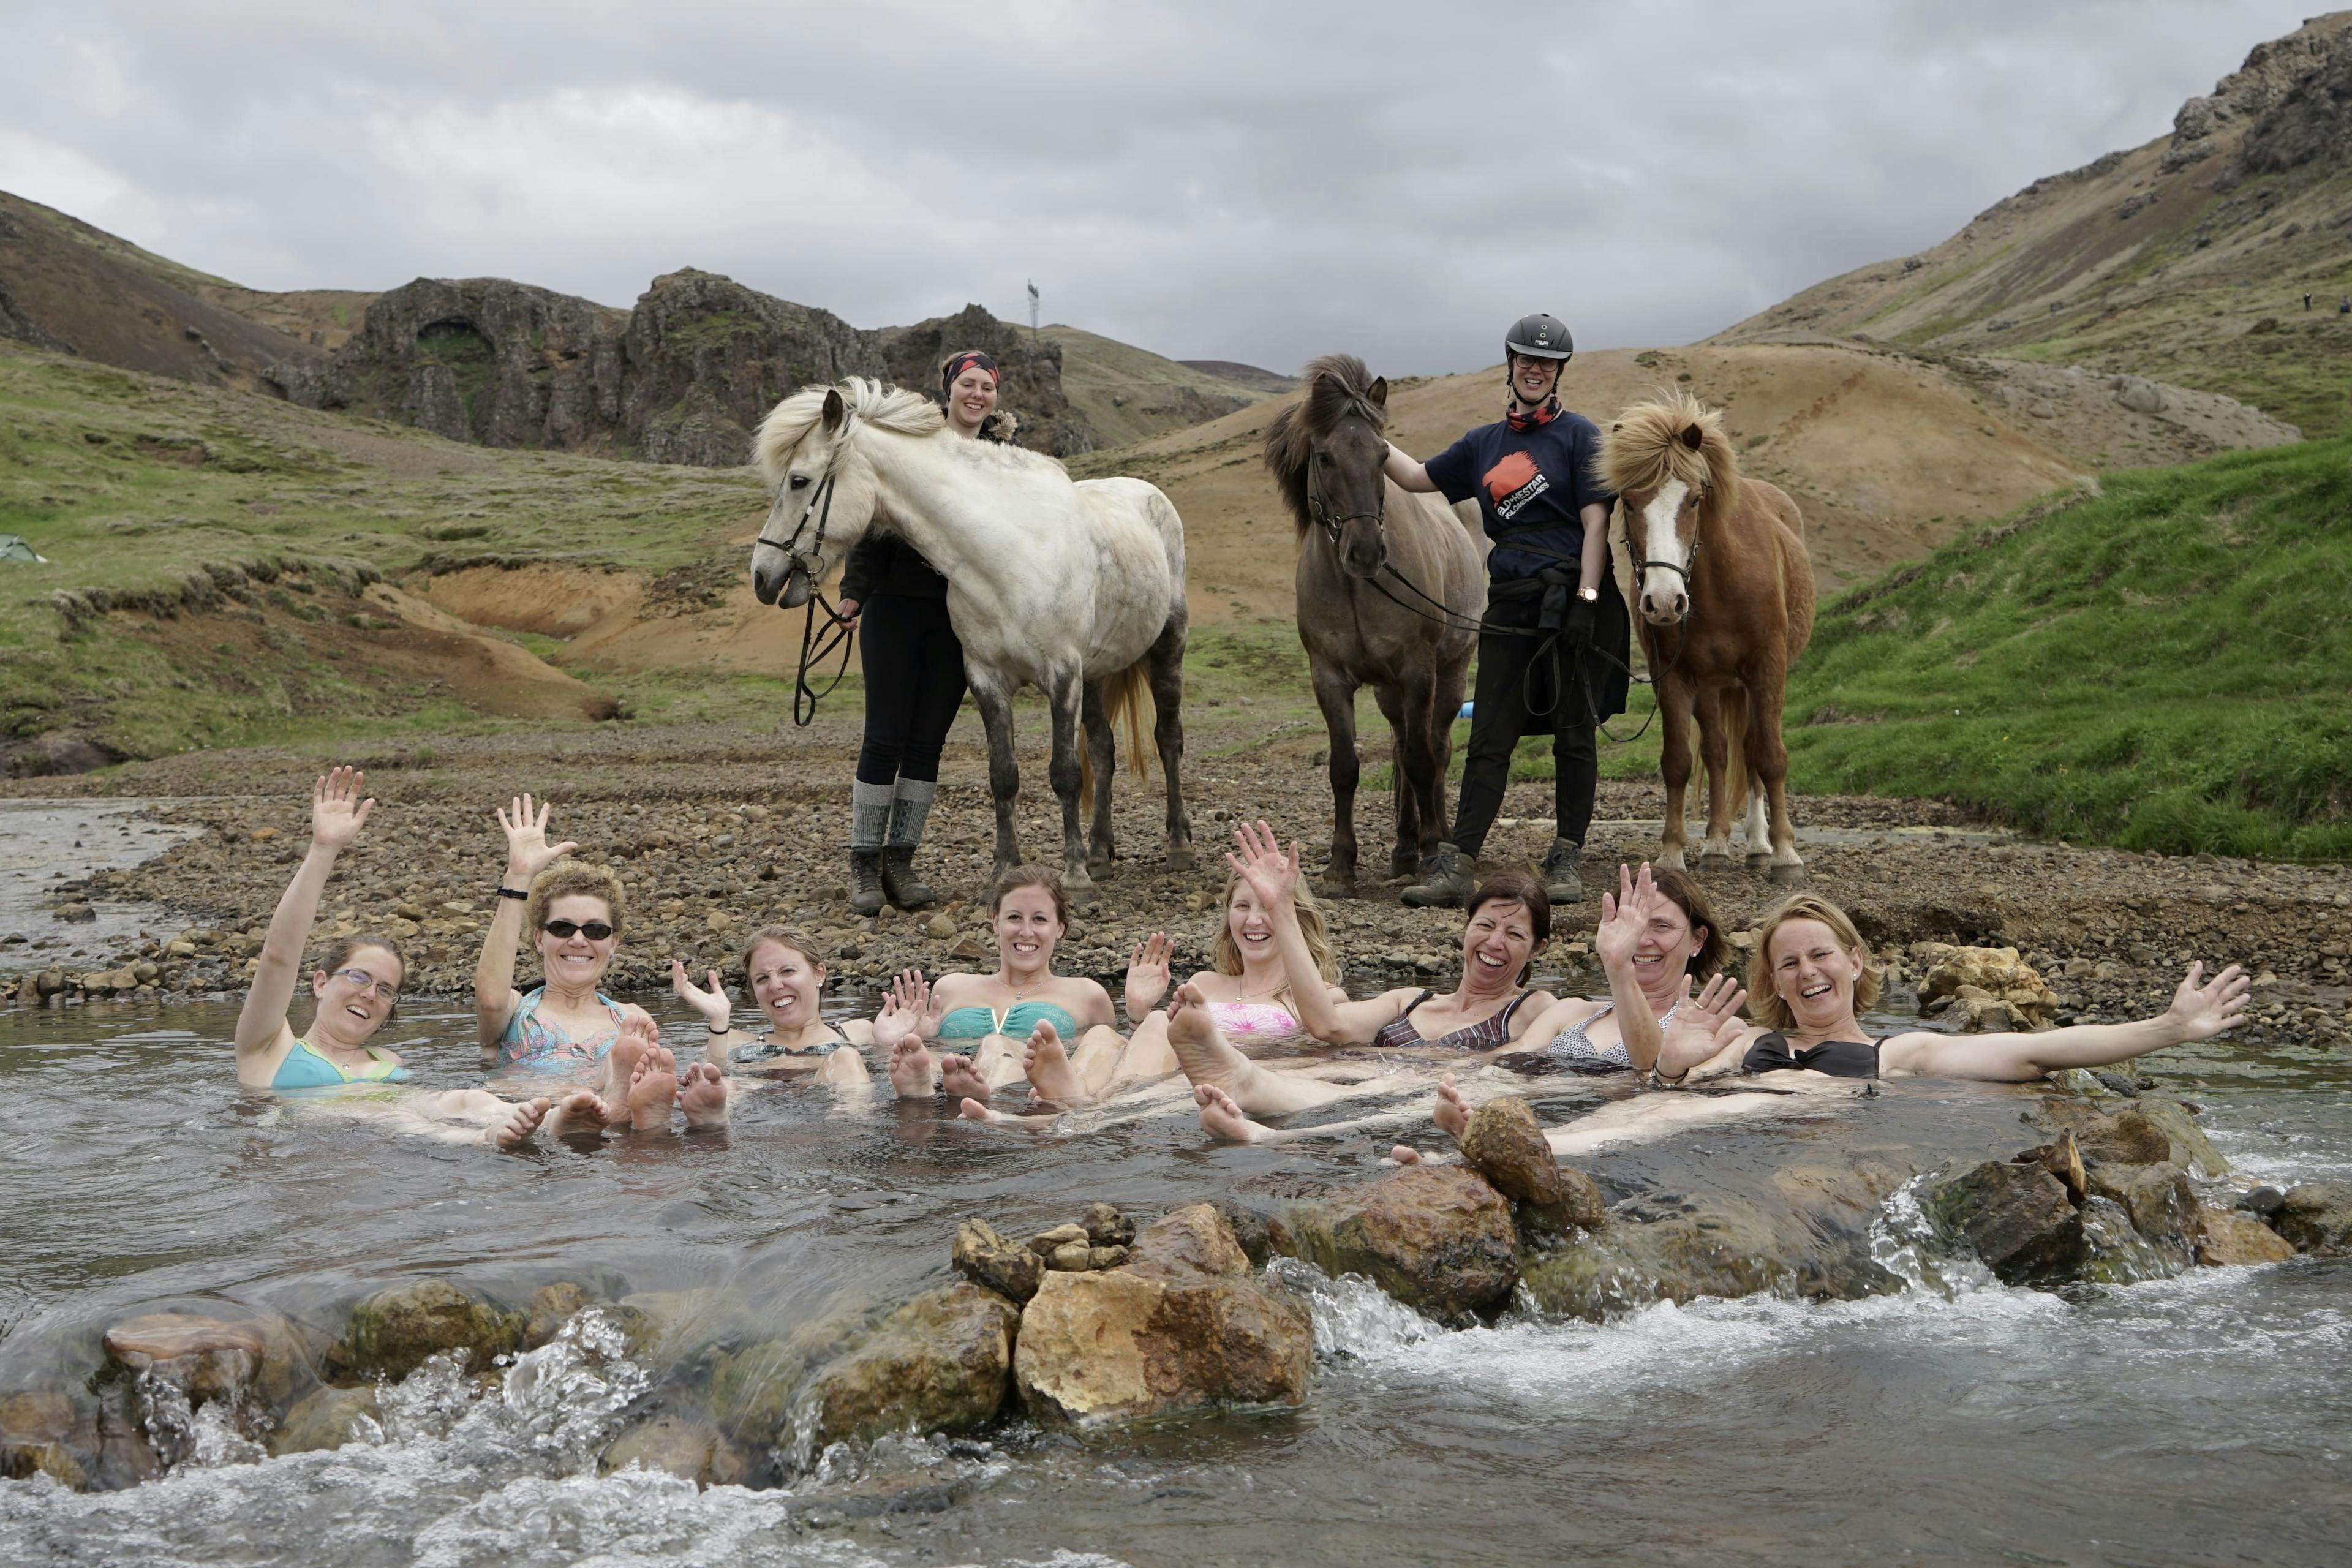 Product image for Horseback Riding & Bathing In Hot Springs Full Day Tour